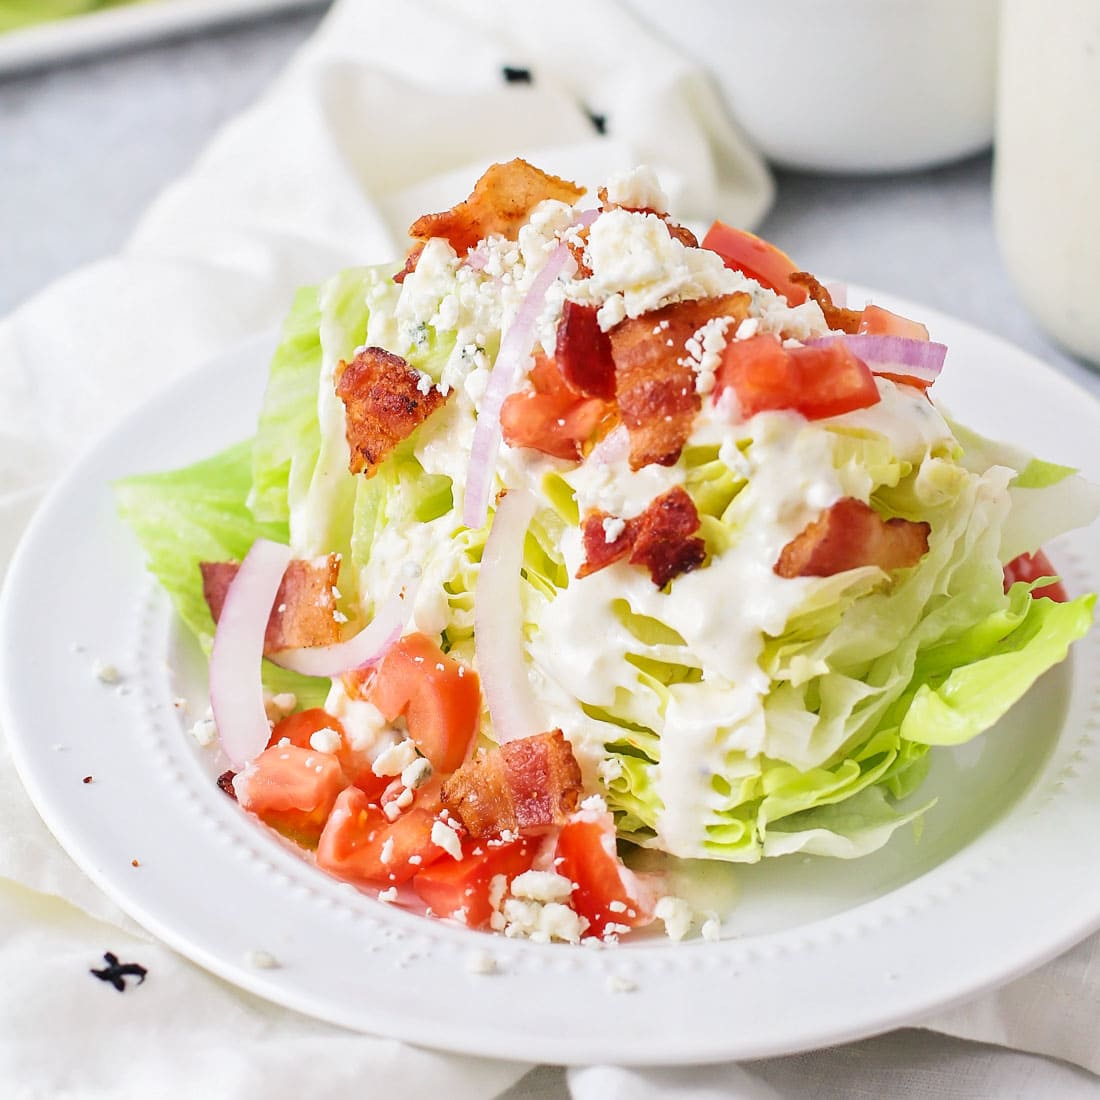 Green Salad Recipes - Wedge salad topped with bacon, bleu cheese crumbles, and bleu cheese dressing.